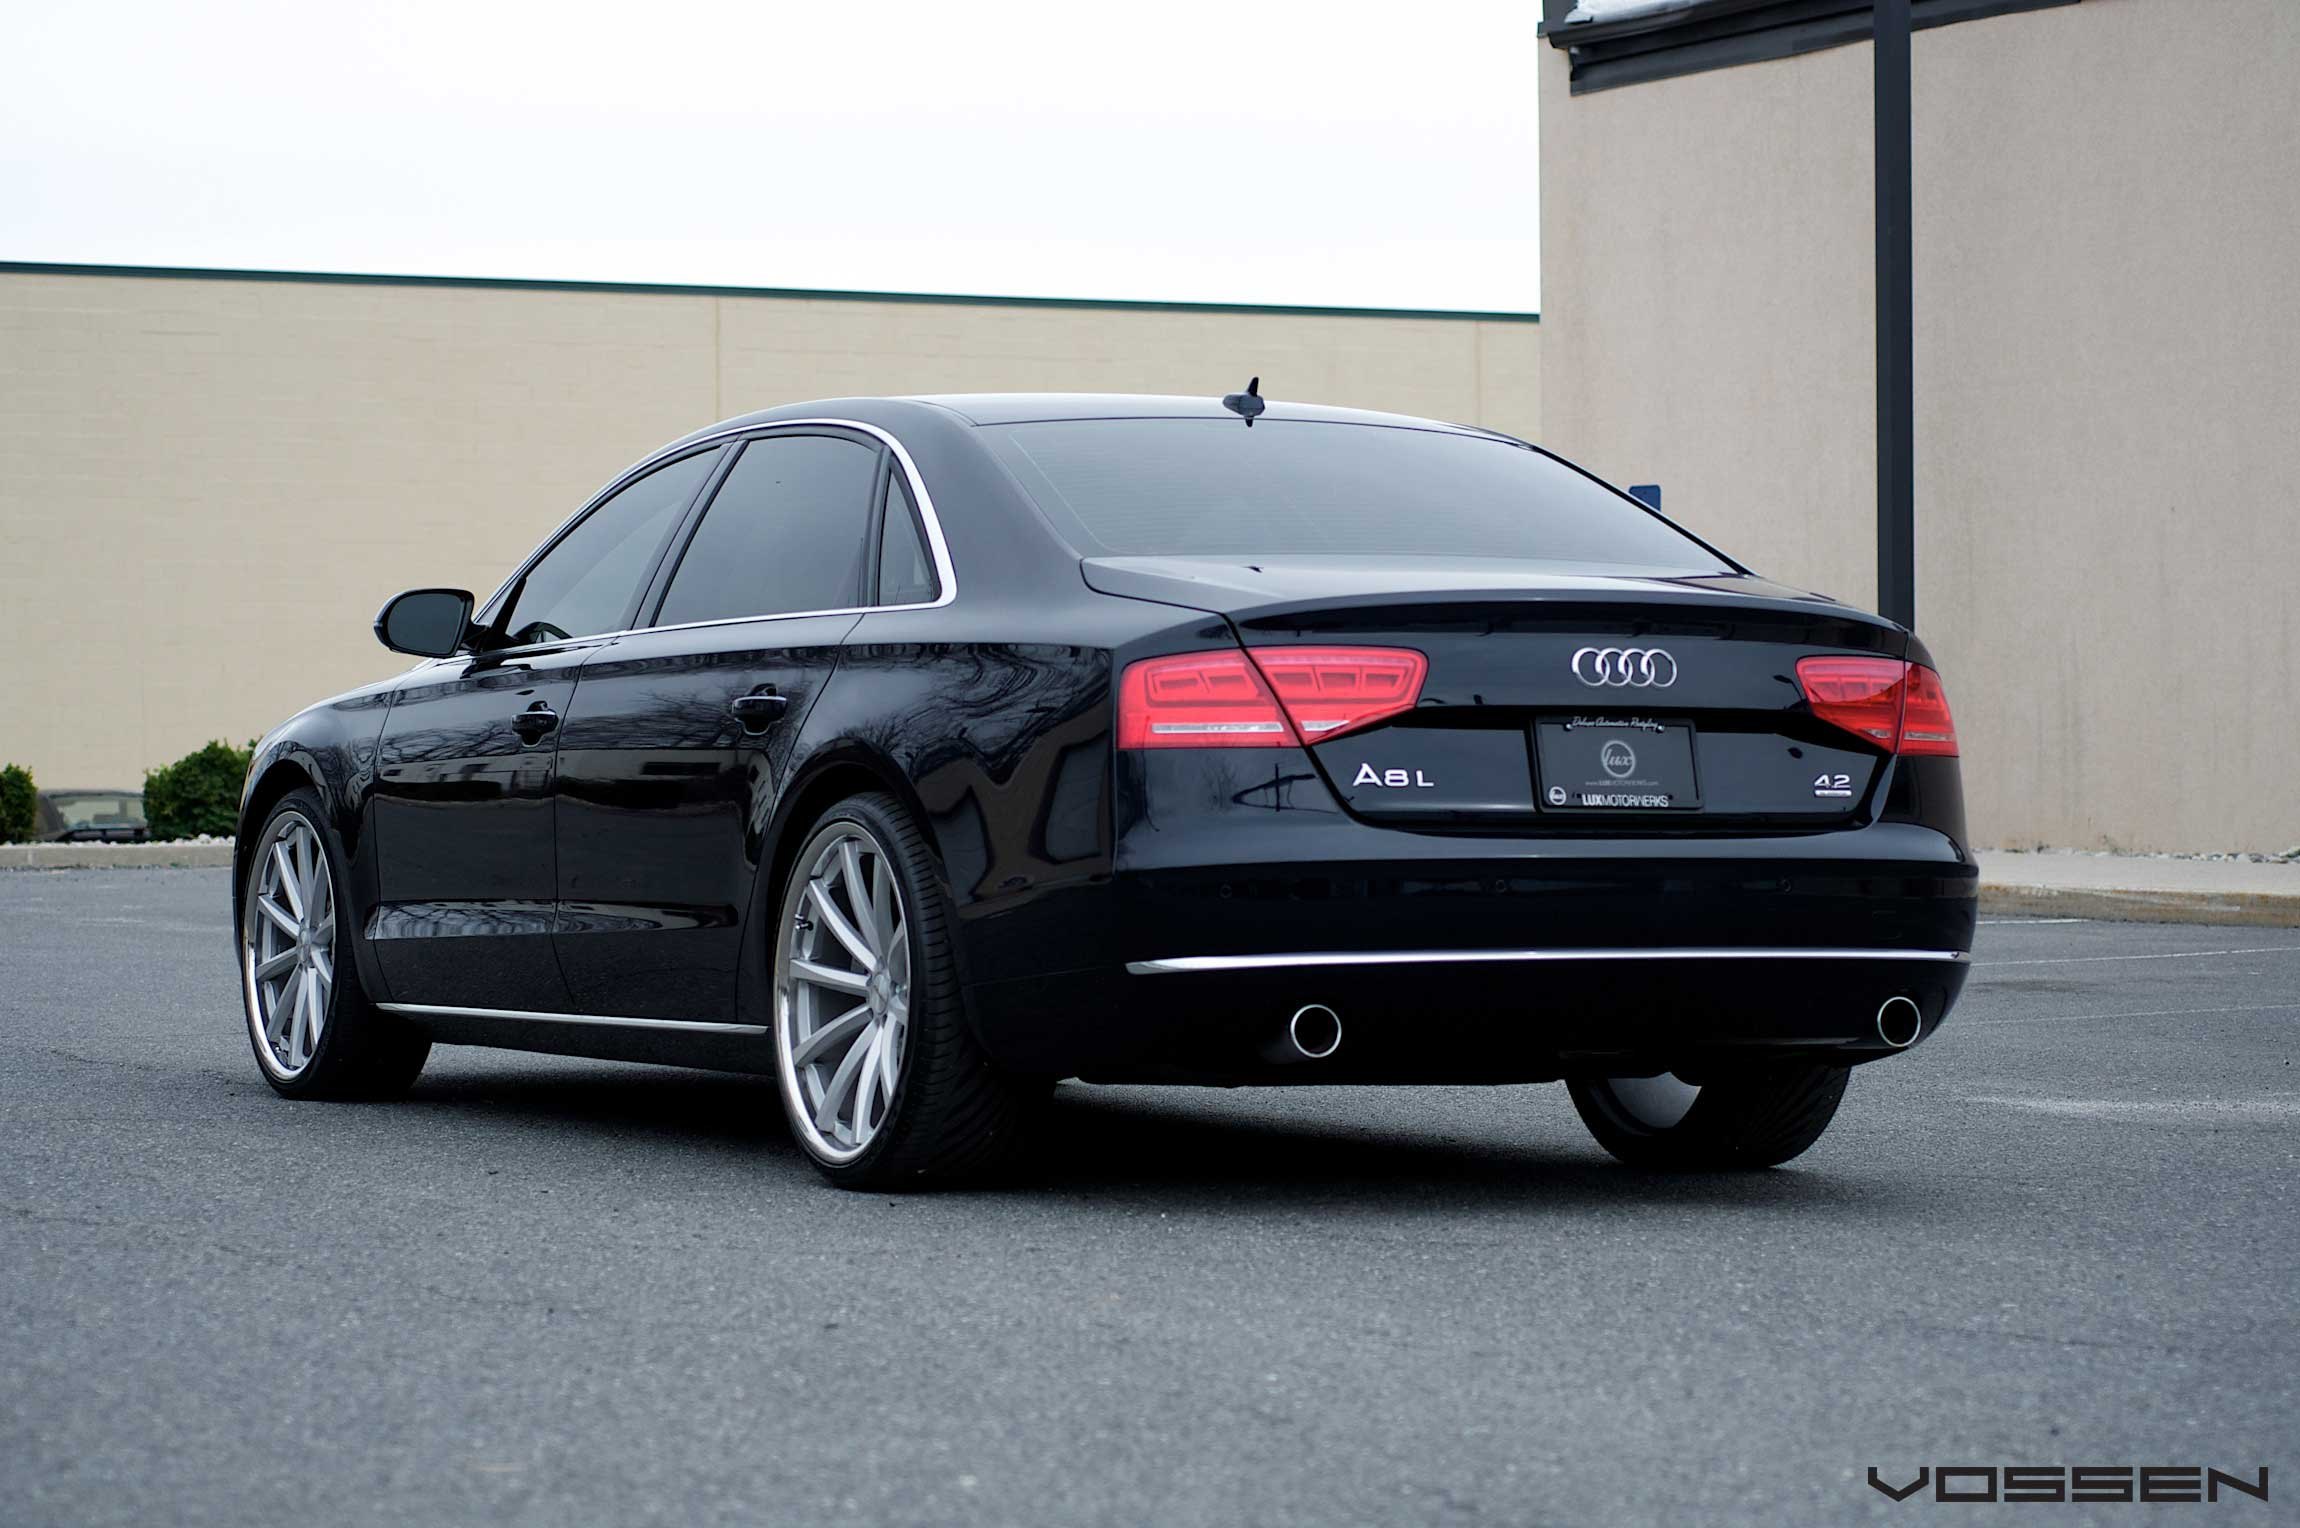 Rear Bumper Cover on Black Audi A8 - Photo by Vossen